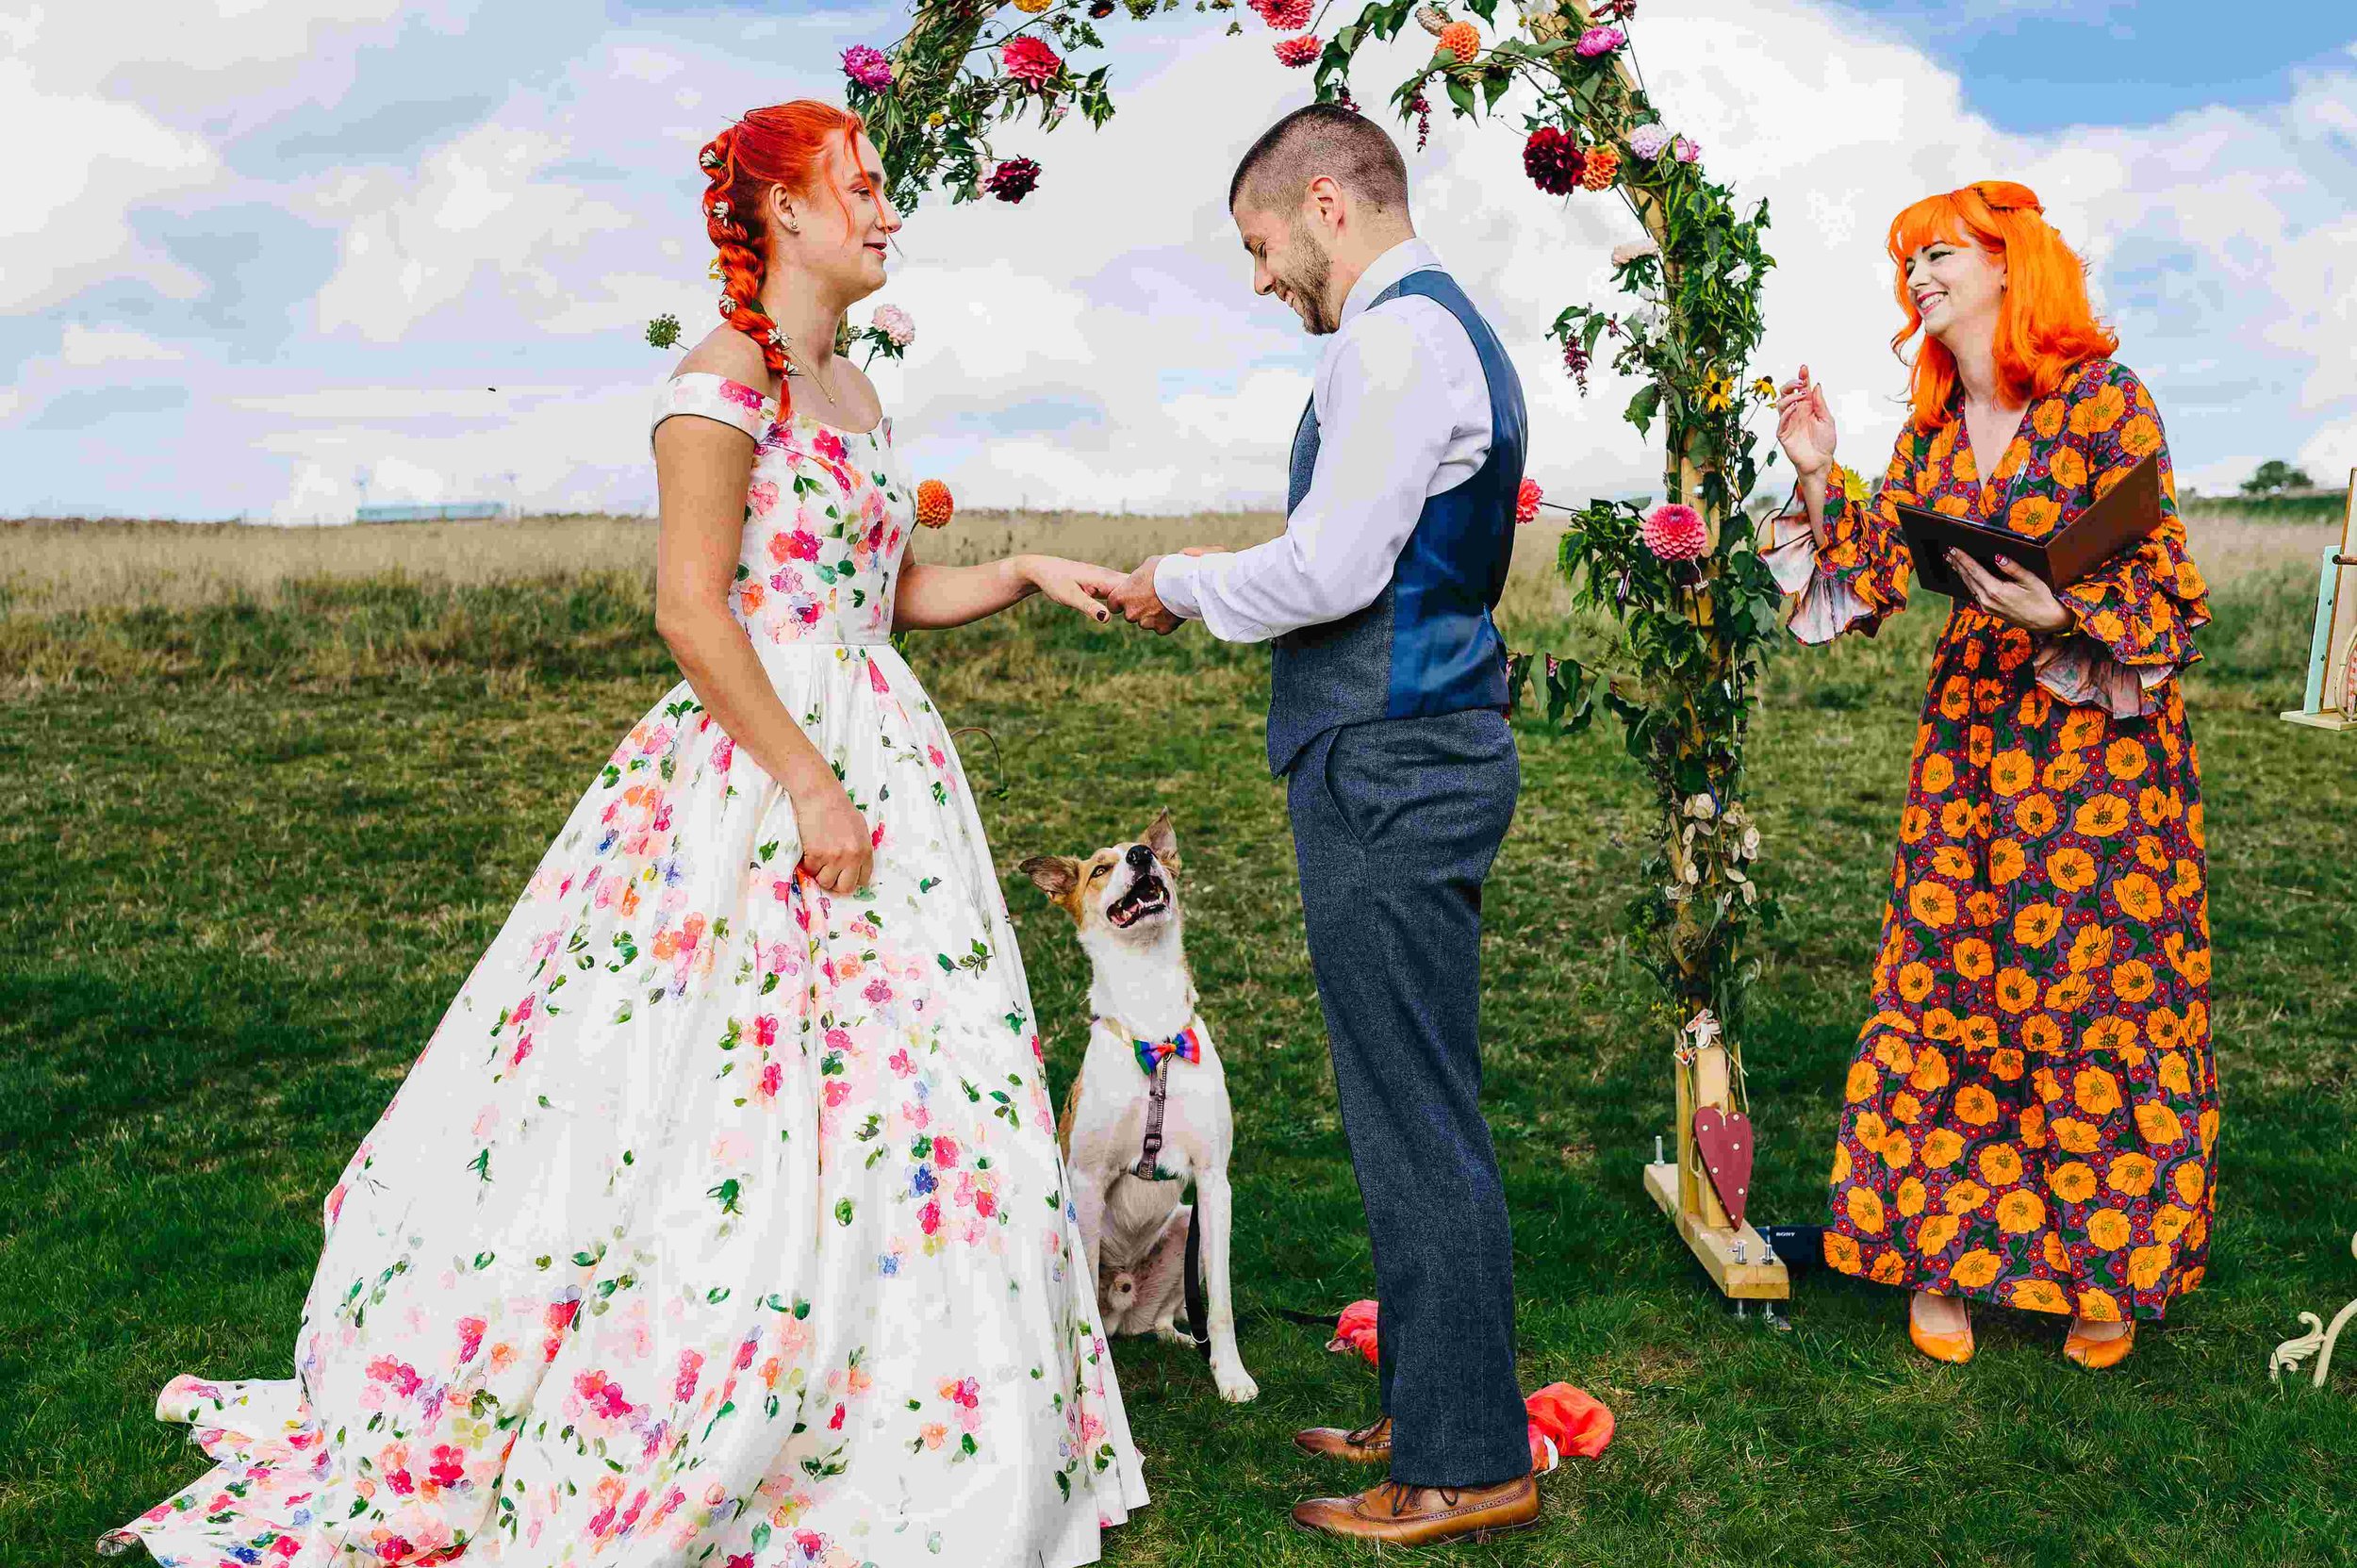  Photo by: Andrew Craner  A bright image of a cool humanist wedding celebrant standing to the side of the bride and groom in front of a floral arch. She is wearing a bright, long sleeved, long dress covered in a bright orange flower print with orange